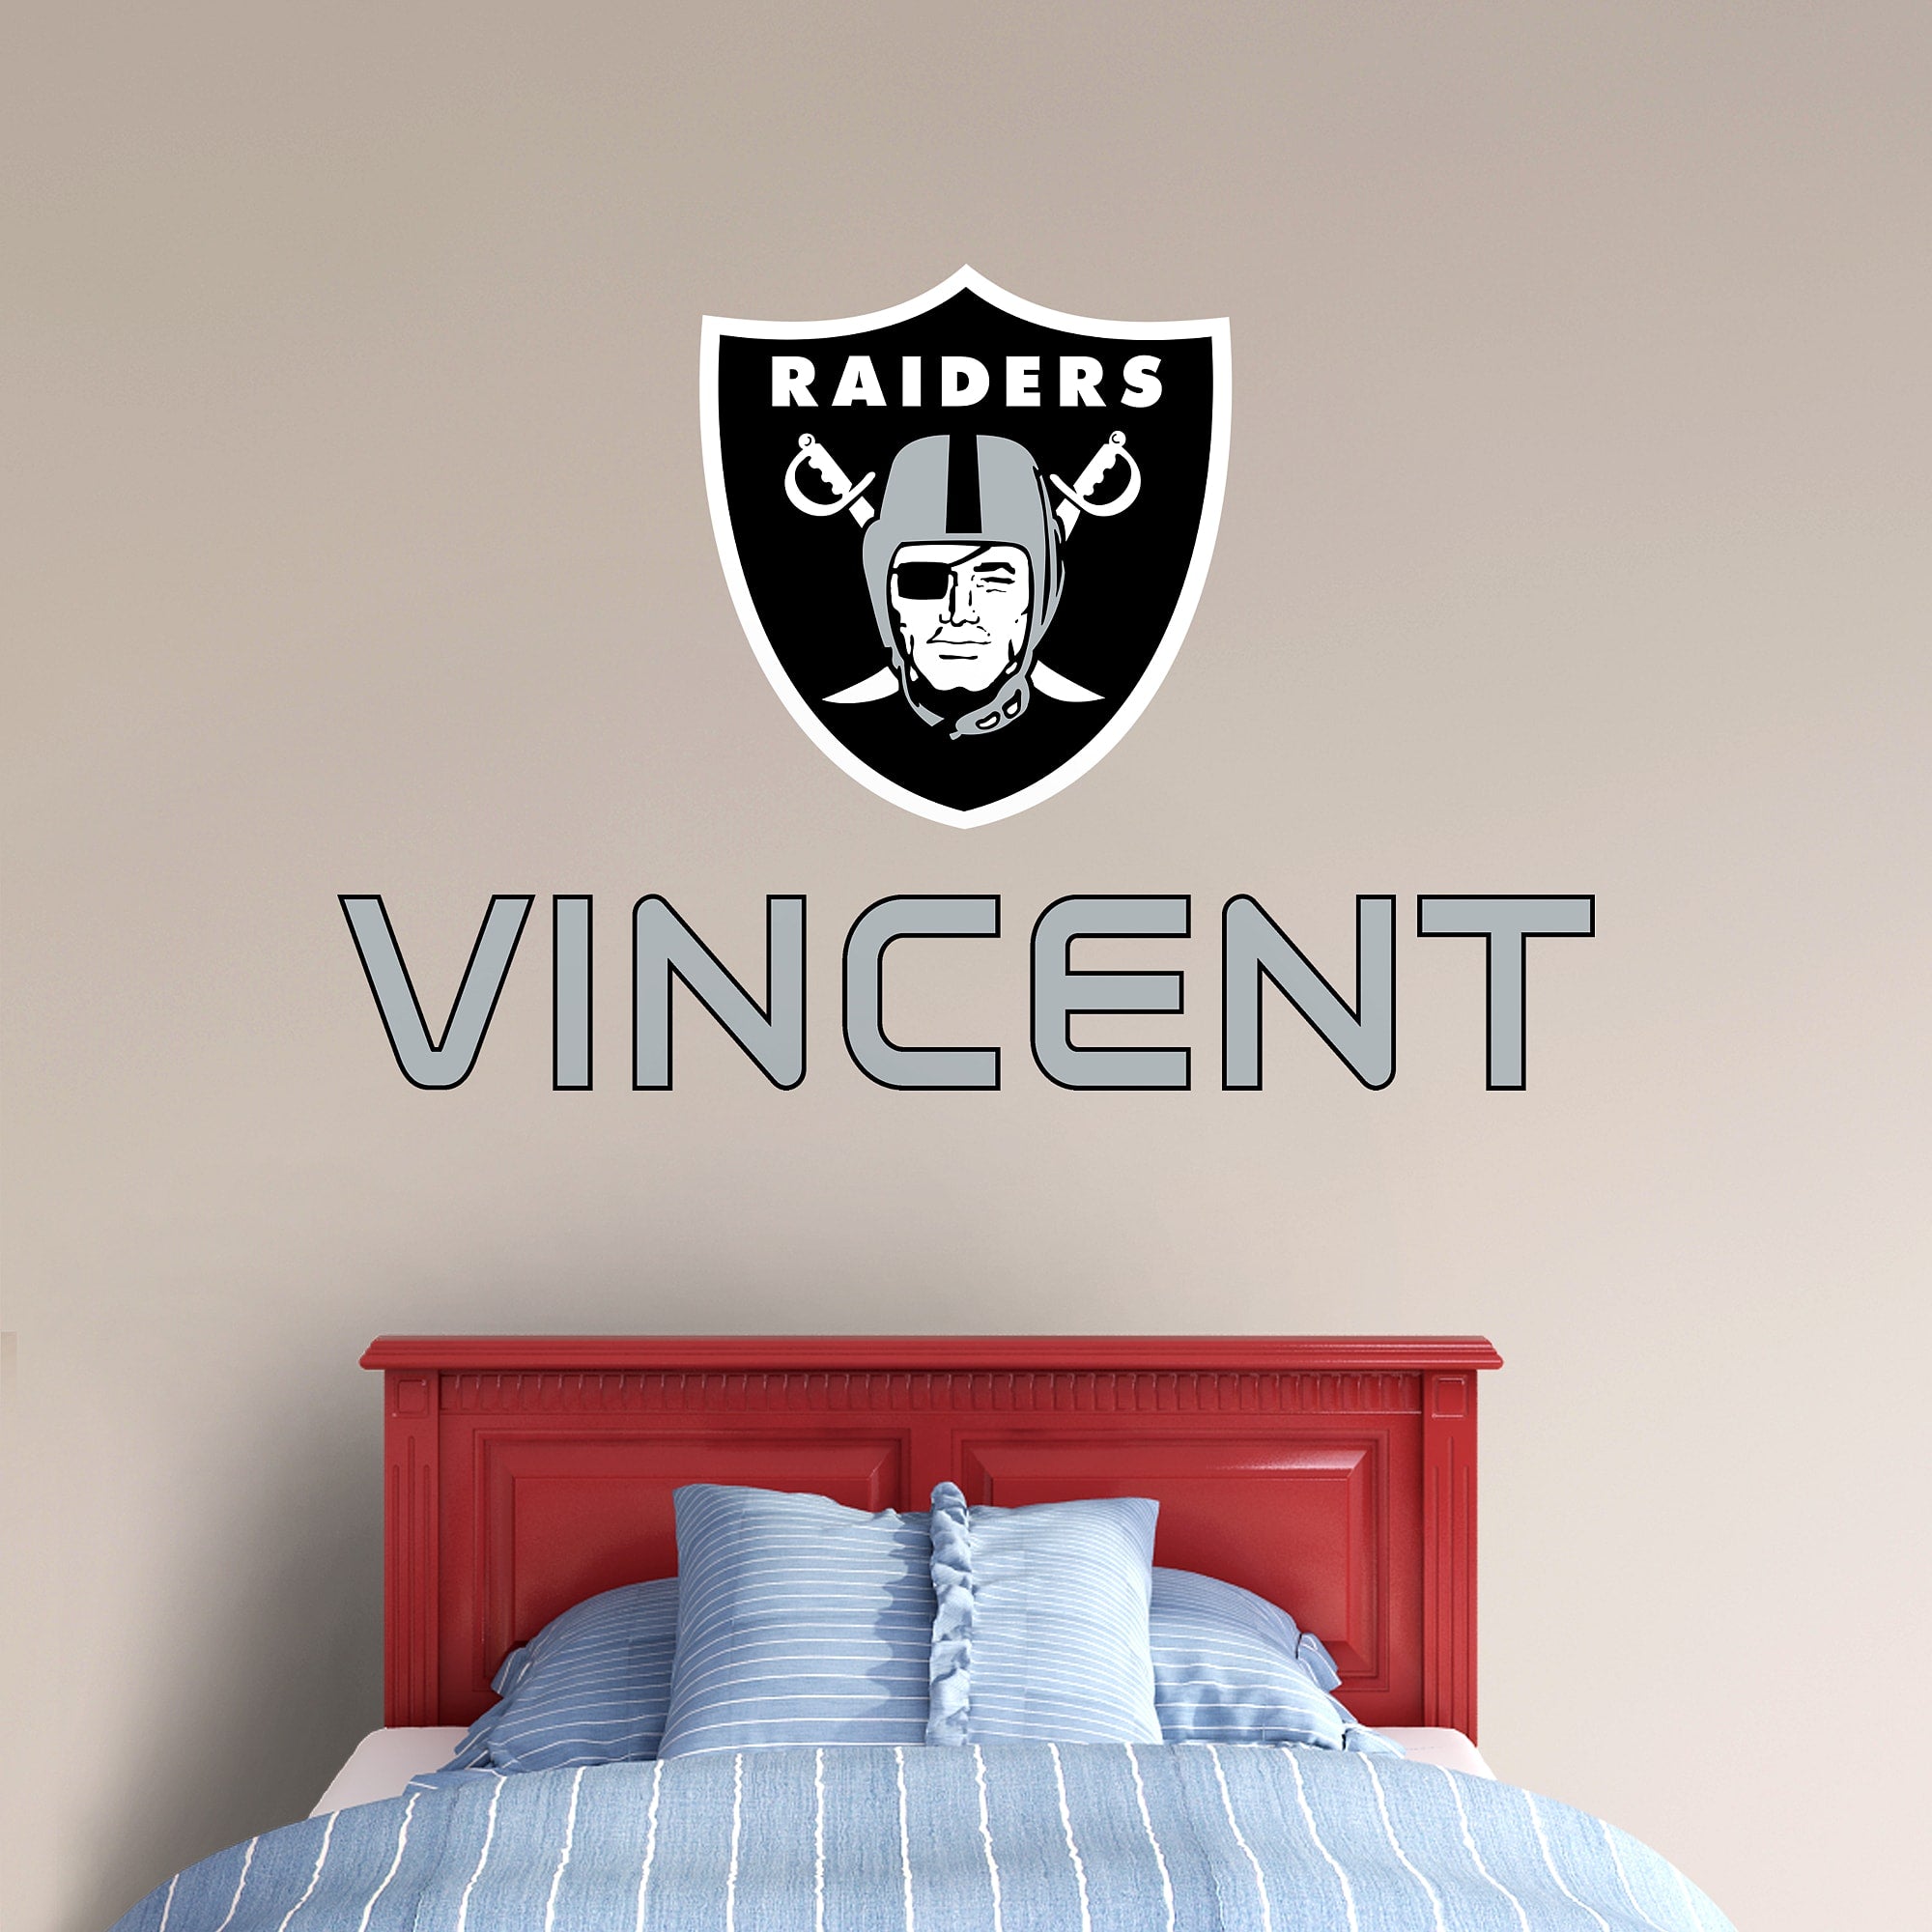 Las Vegas Raiders: Stacked Personalized Name - Officially Licensed NFL Transfer Decal in Silver (52"W x 39.5"H) by Fathead | Vin